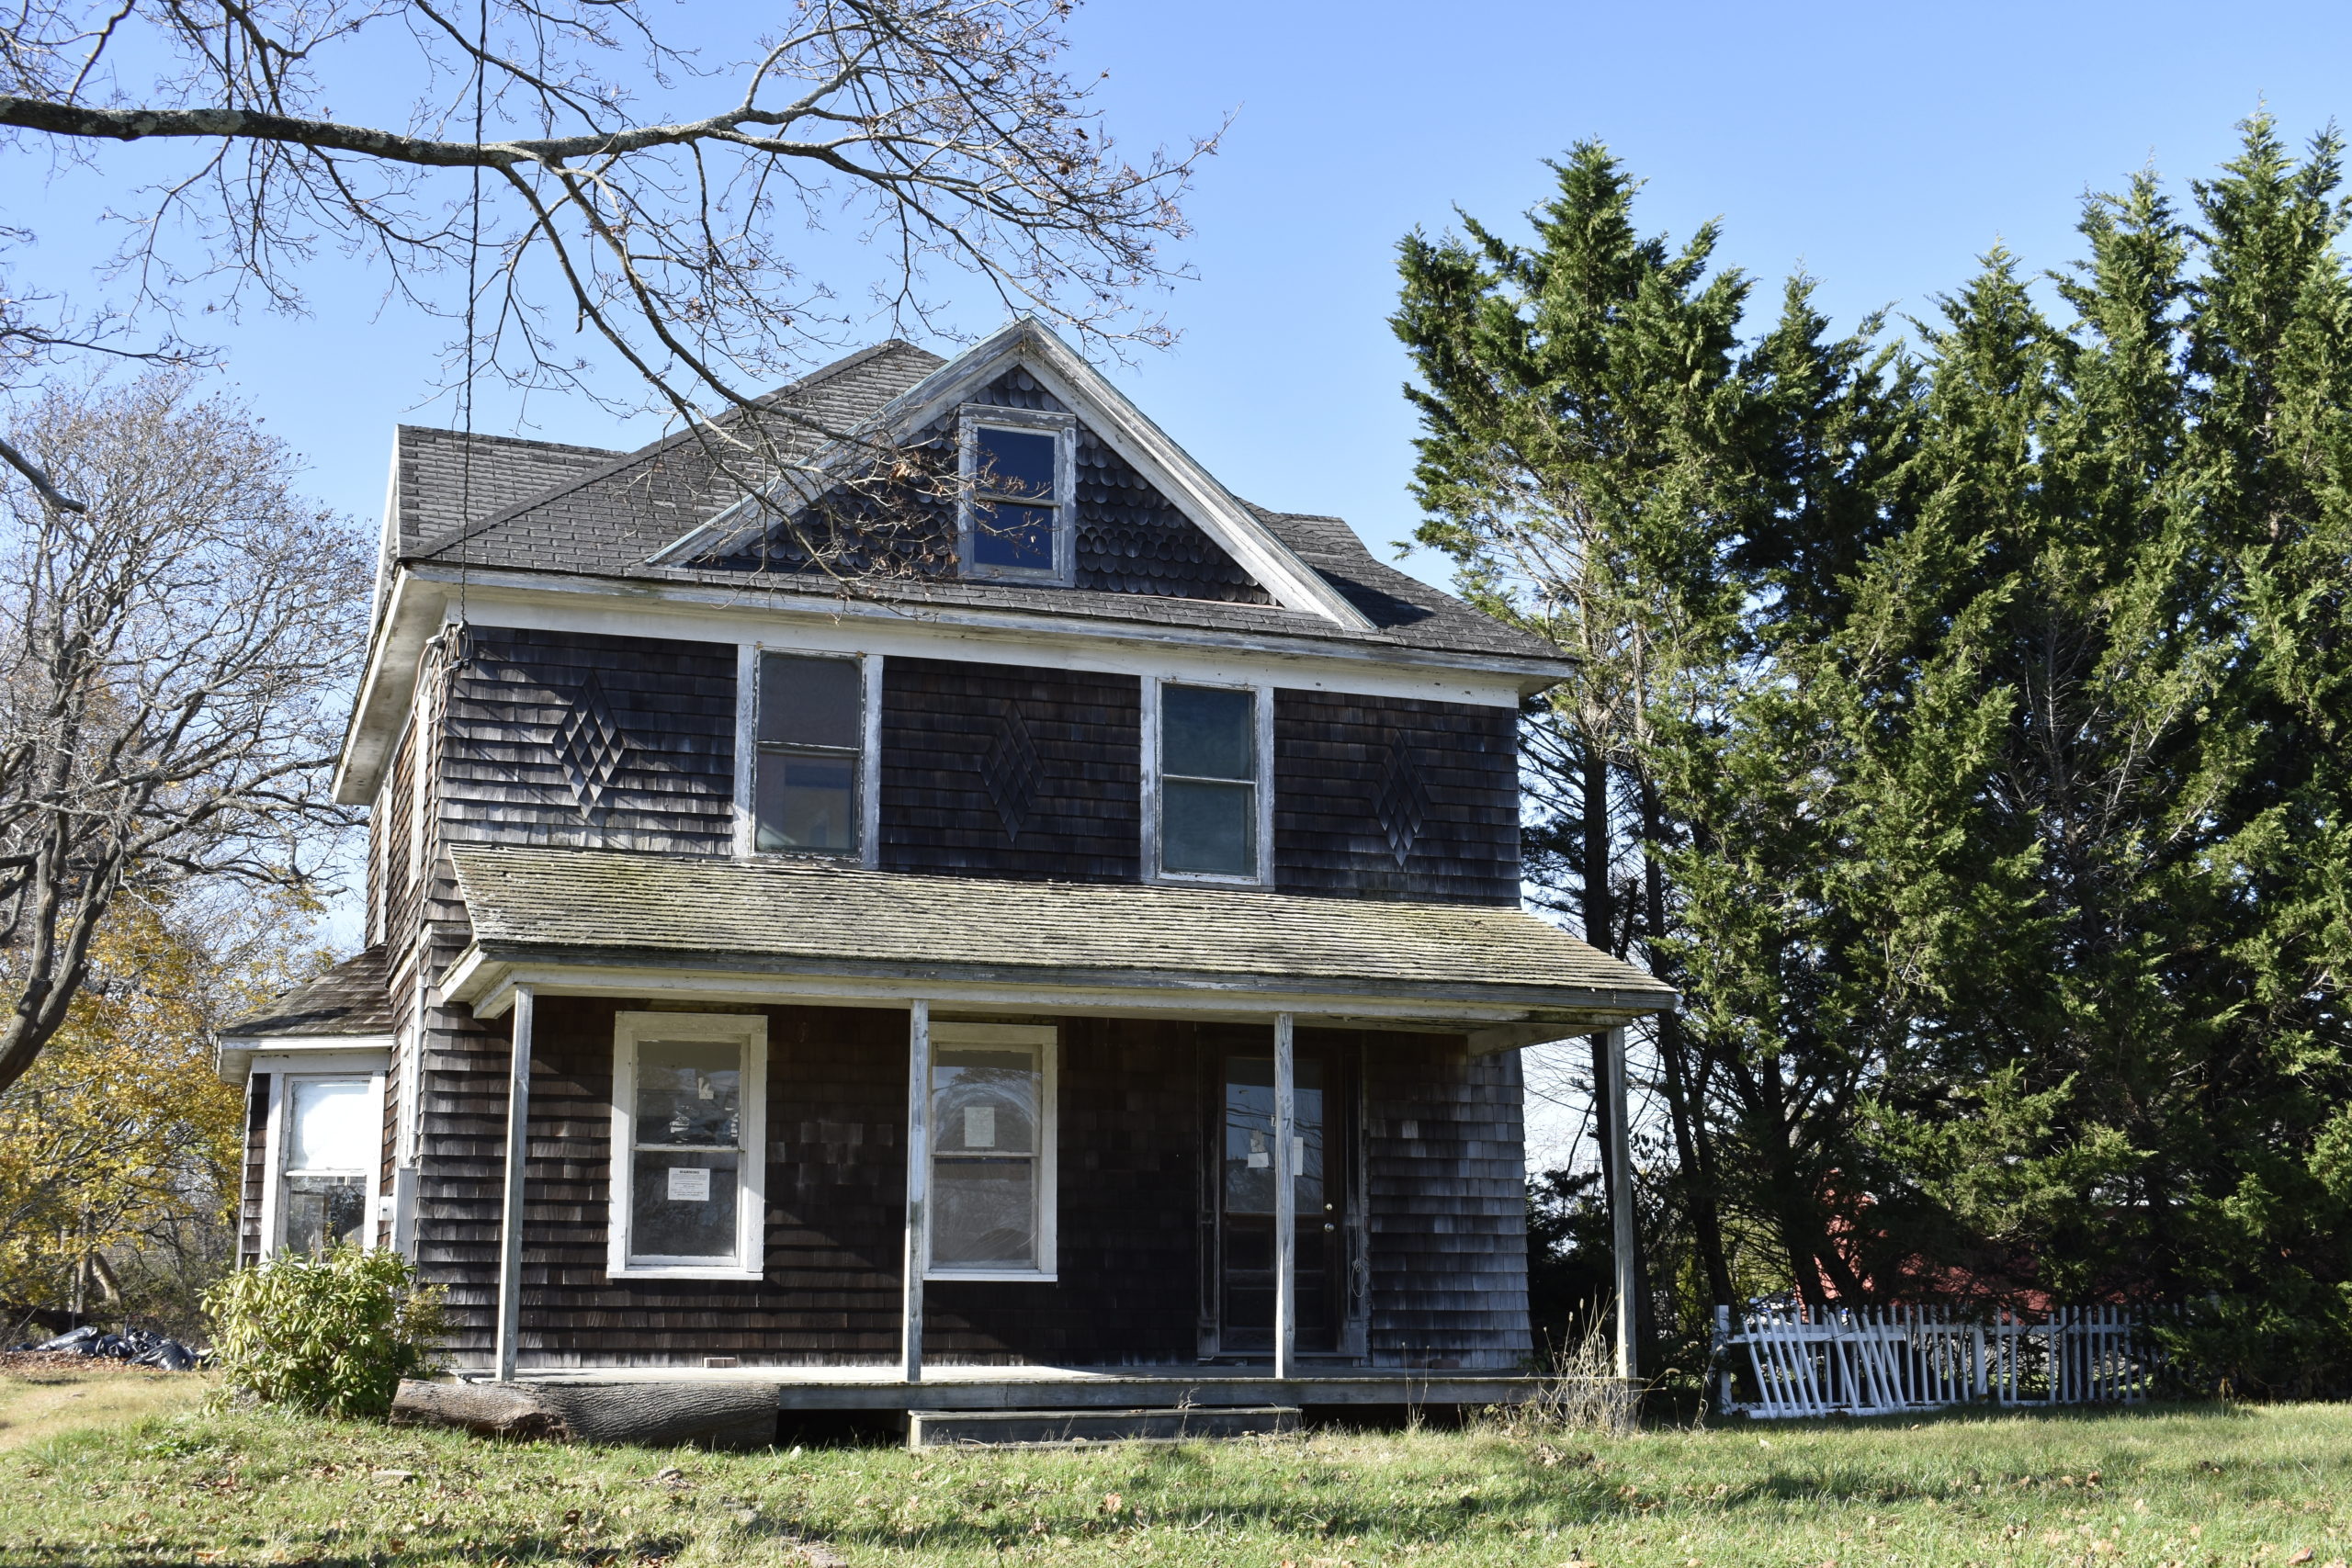 Southampton Town has identified a neglected house on North Bay Avenue in Eastport as a 